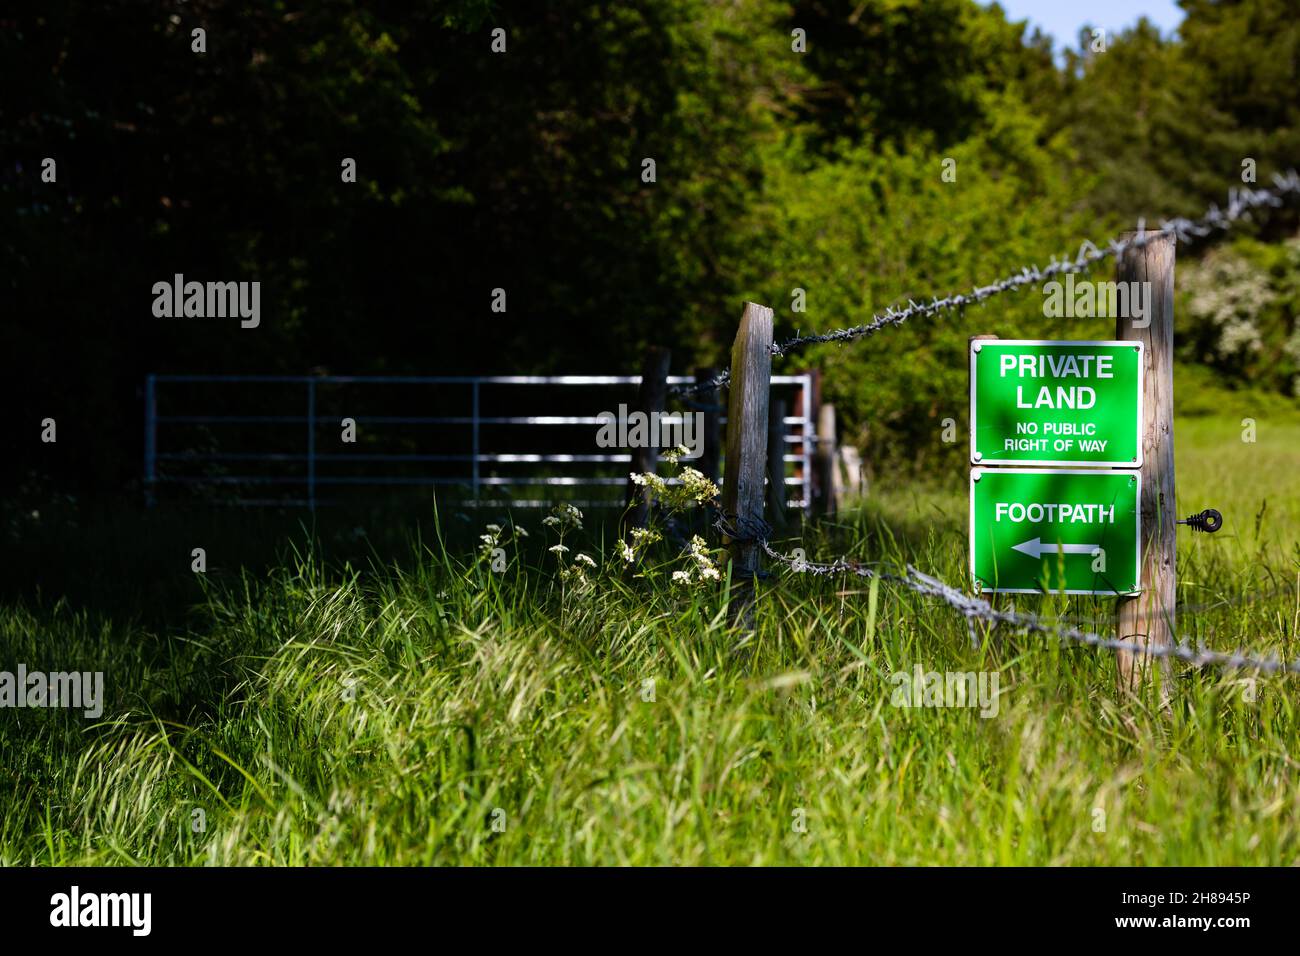 'Private land no right of way' sign in rural Suffolk countryside Stock Photo